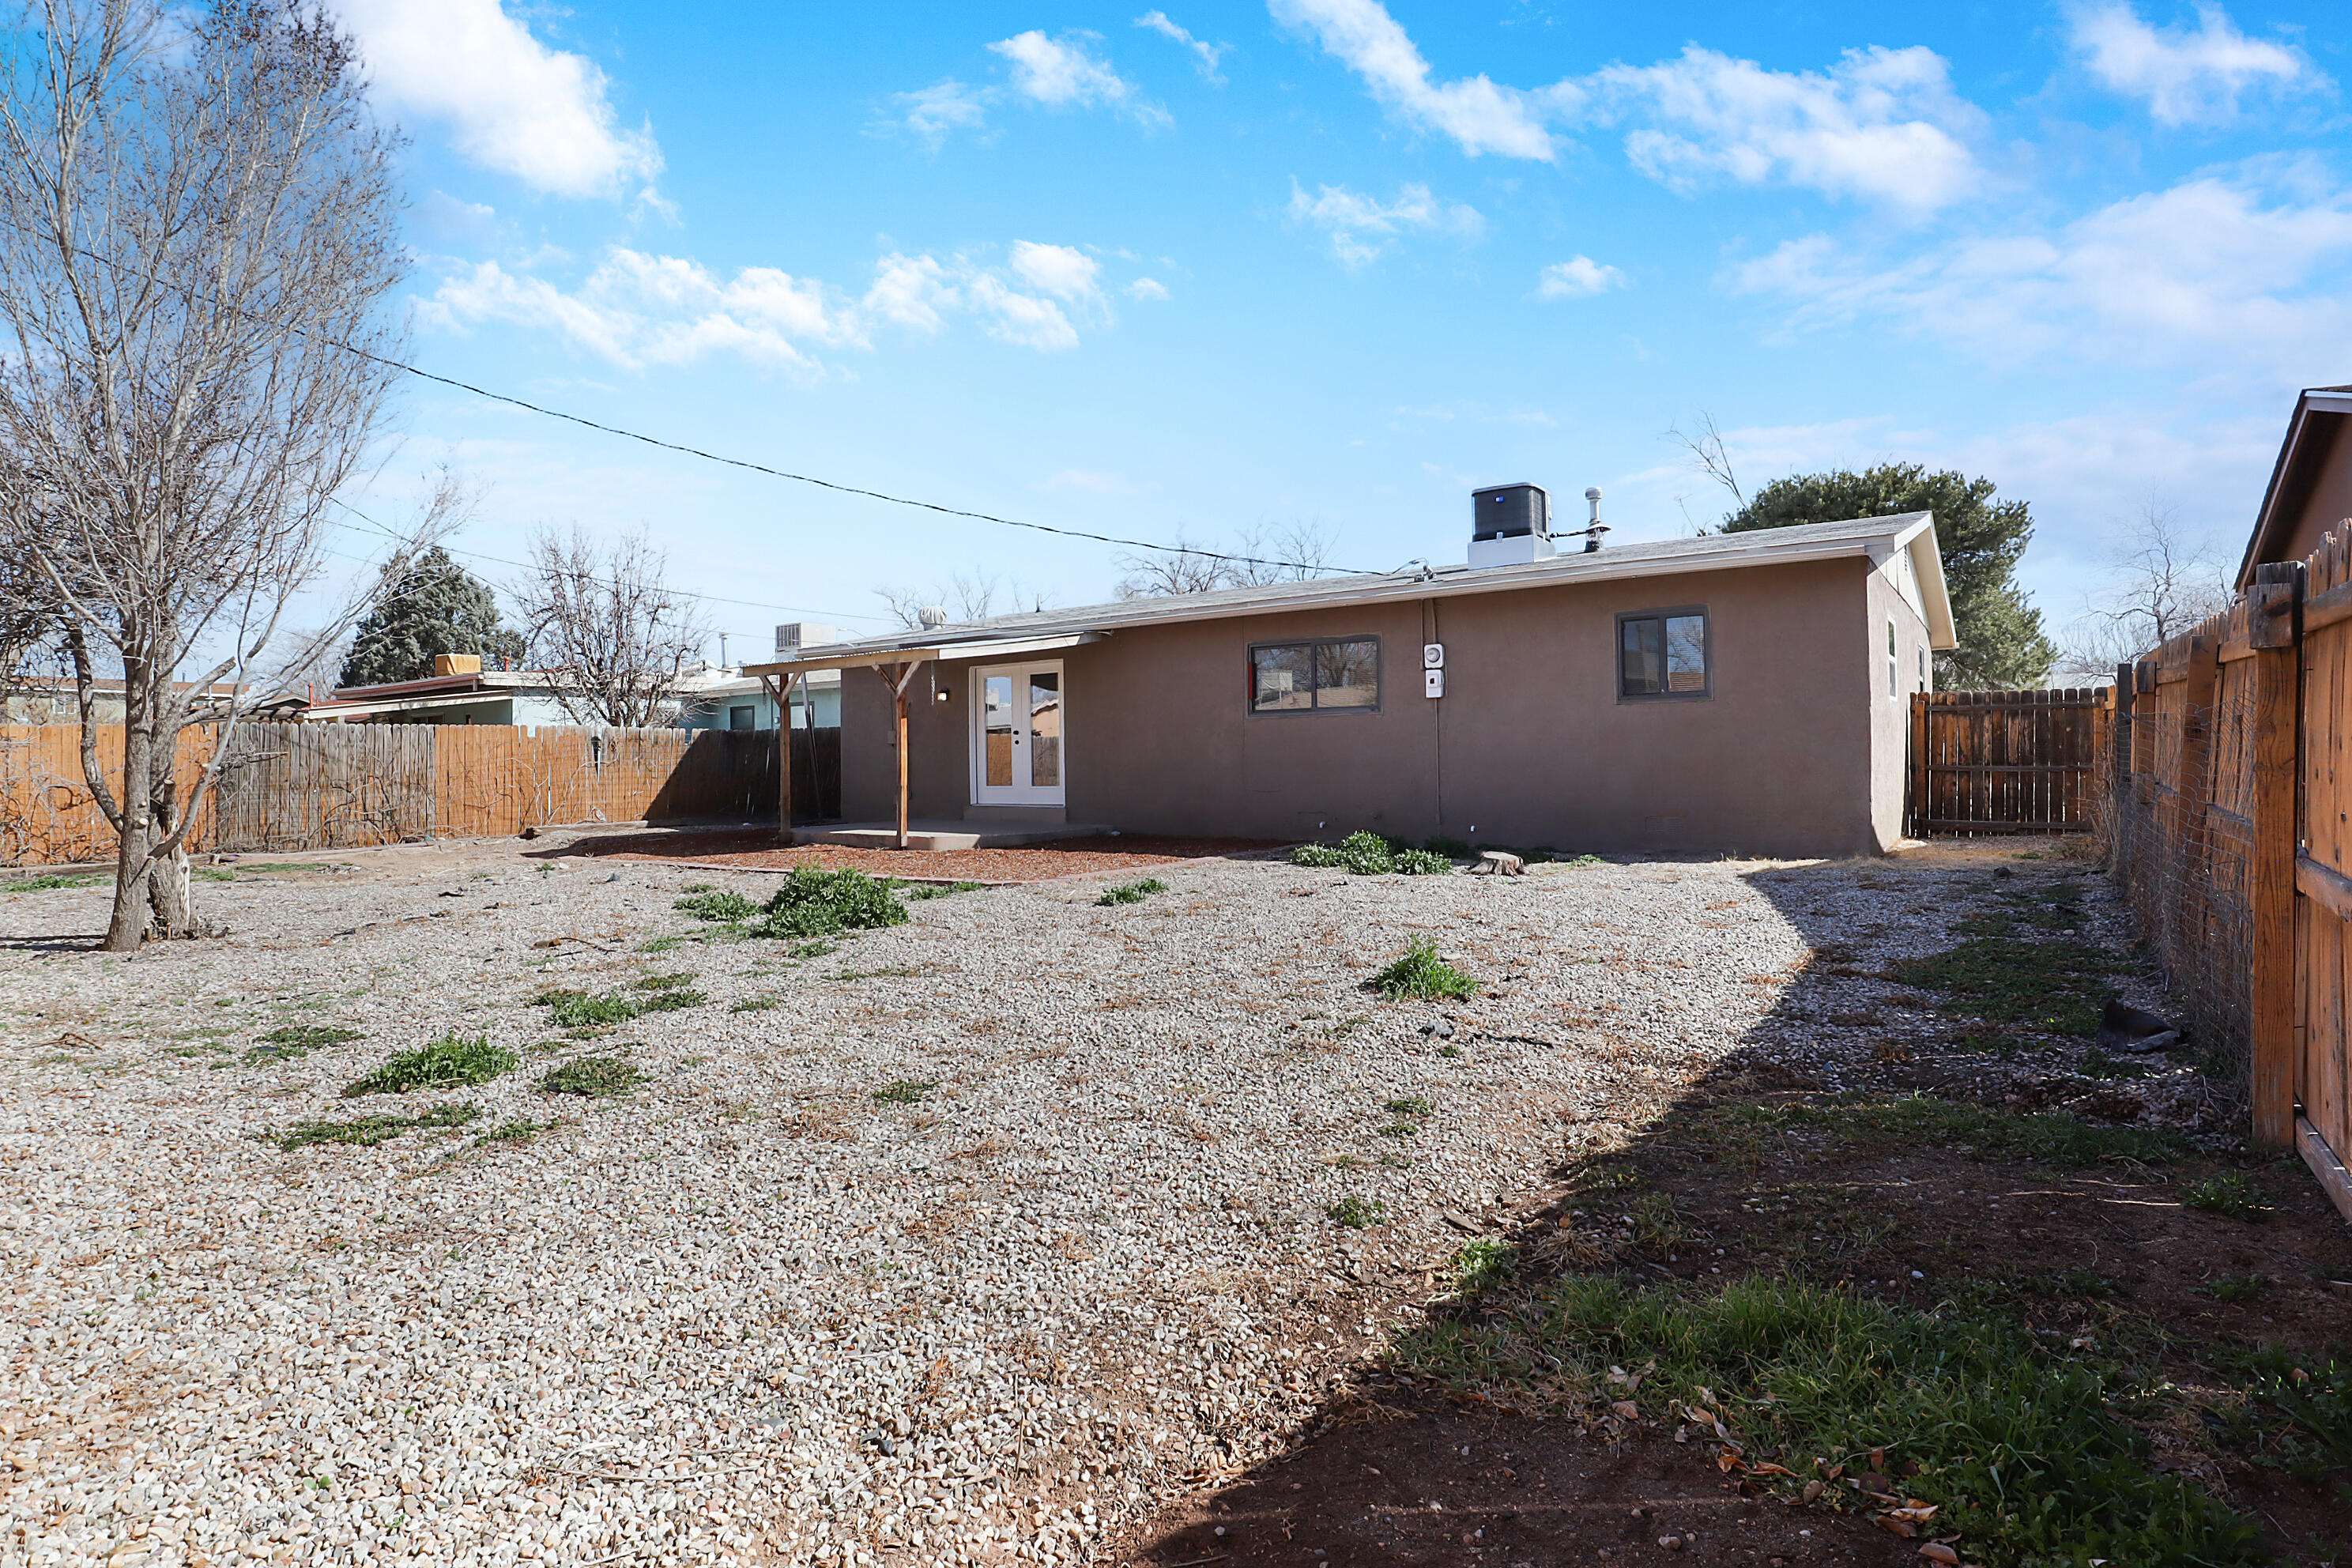 Welcome to this beautiful remodeled on the North Valley community. This nice house Offers 3 Bed/1.5 Bath with a back yard. New Stainless-Steel appliances. Come and take a look at this home today. READY TO MOVE IN!!!